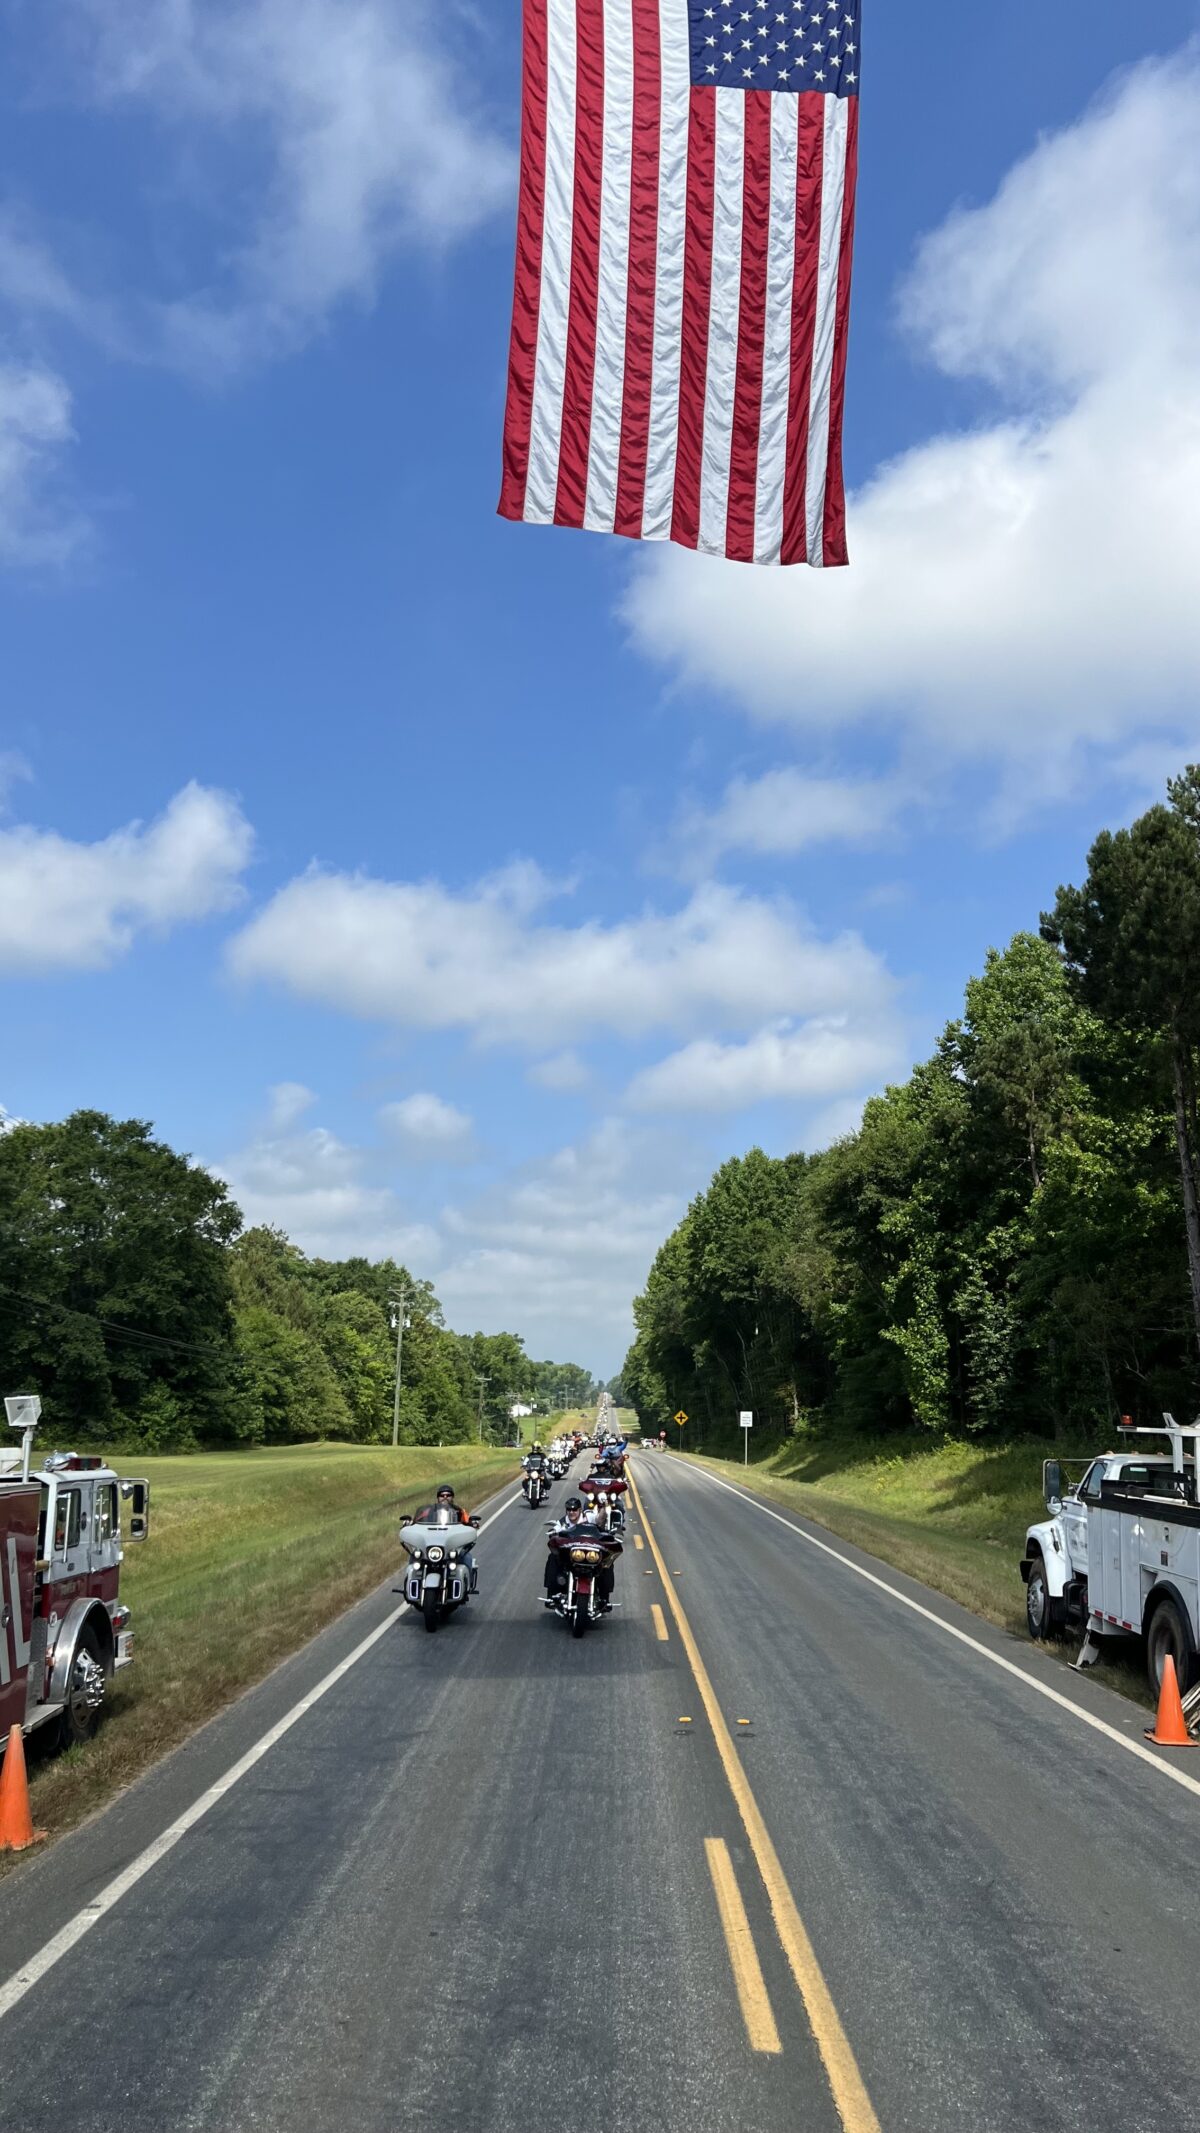 We, the American Legion Riders of Post 233, thank you. We are already